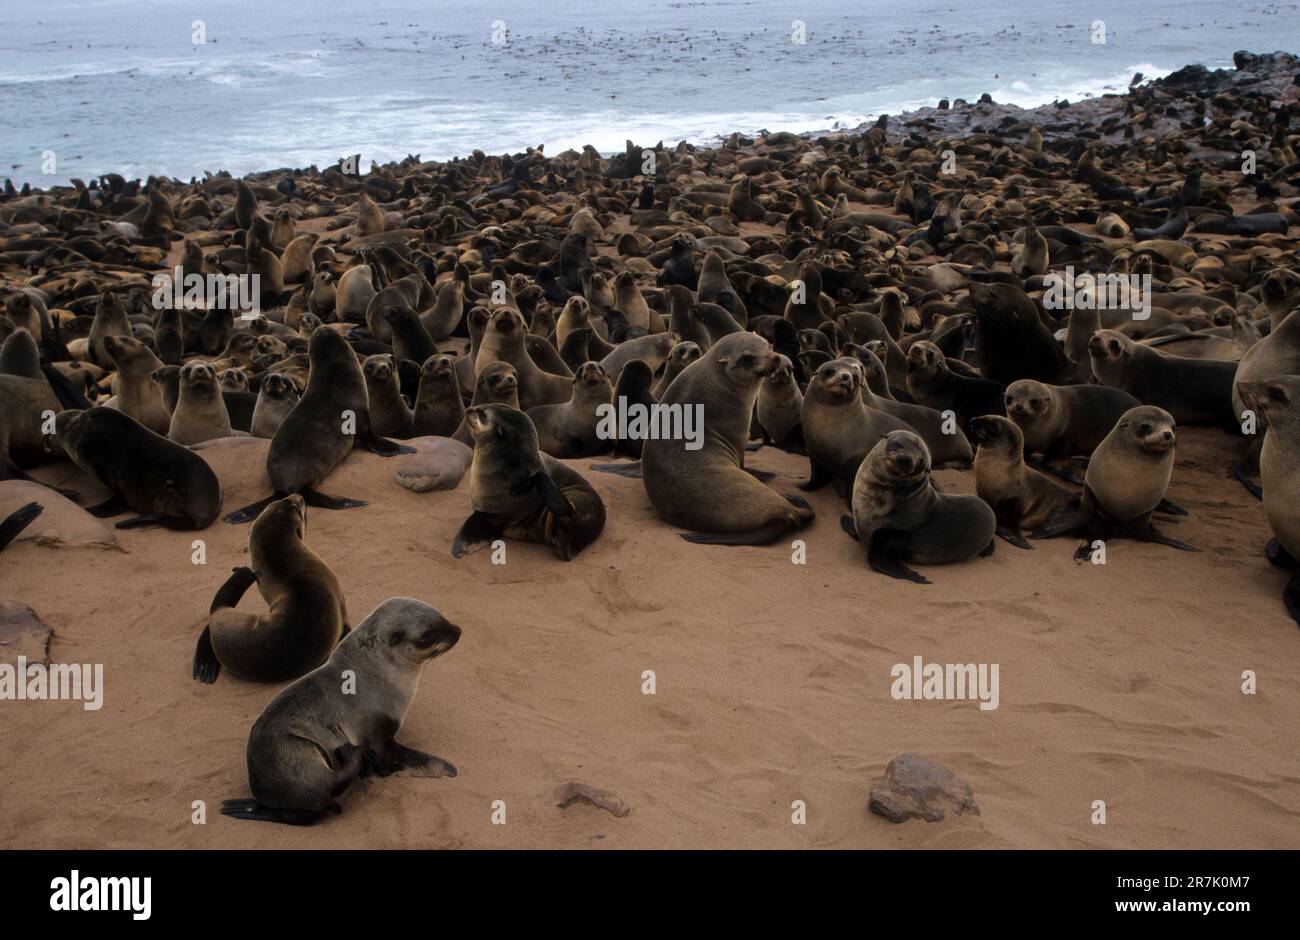 A colony of the brown fur seal (Arctocephalus pusillus), also known as ...